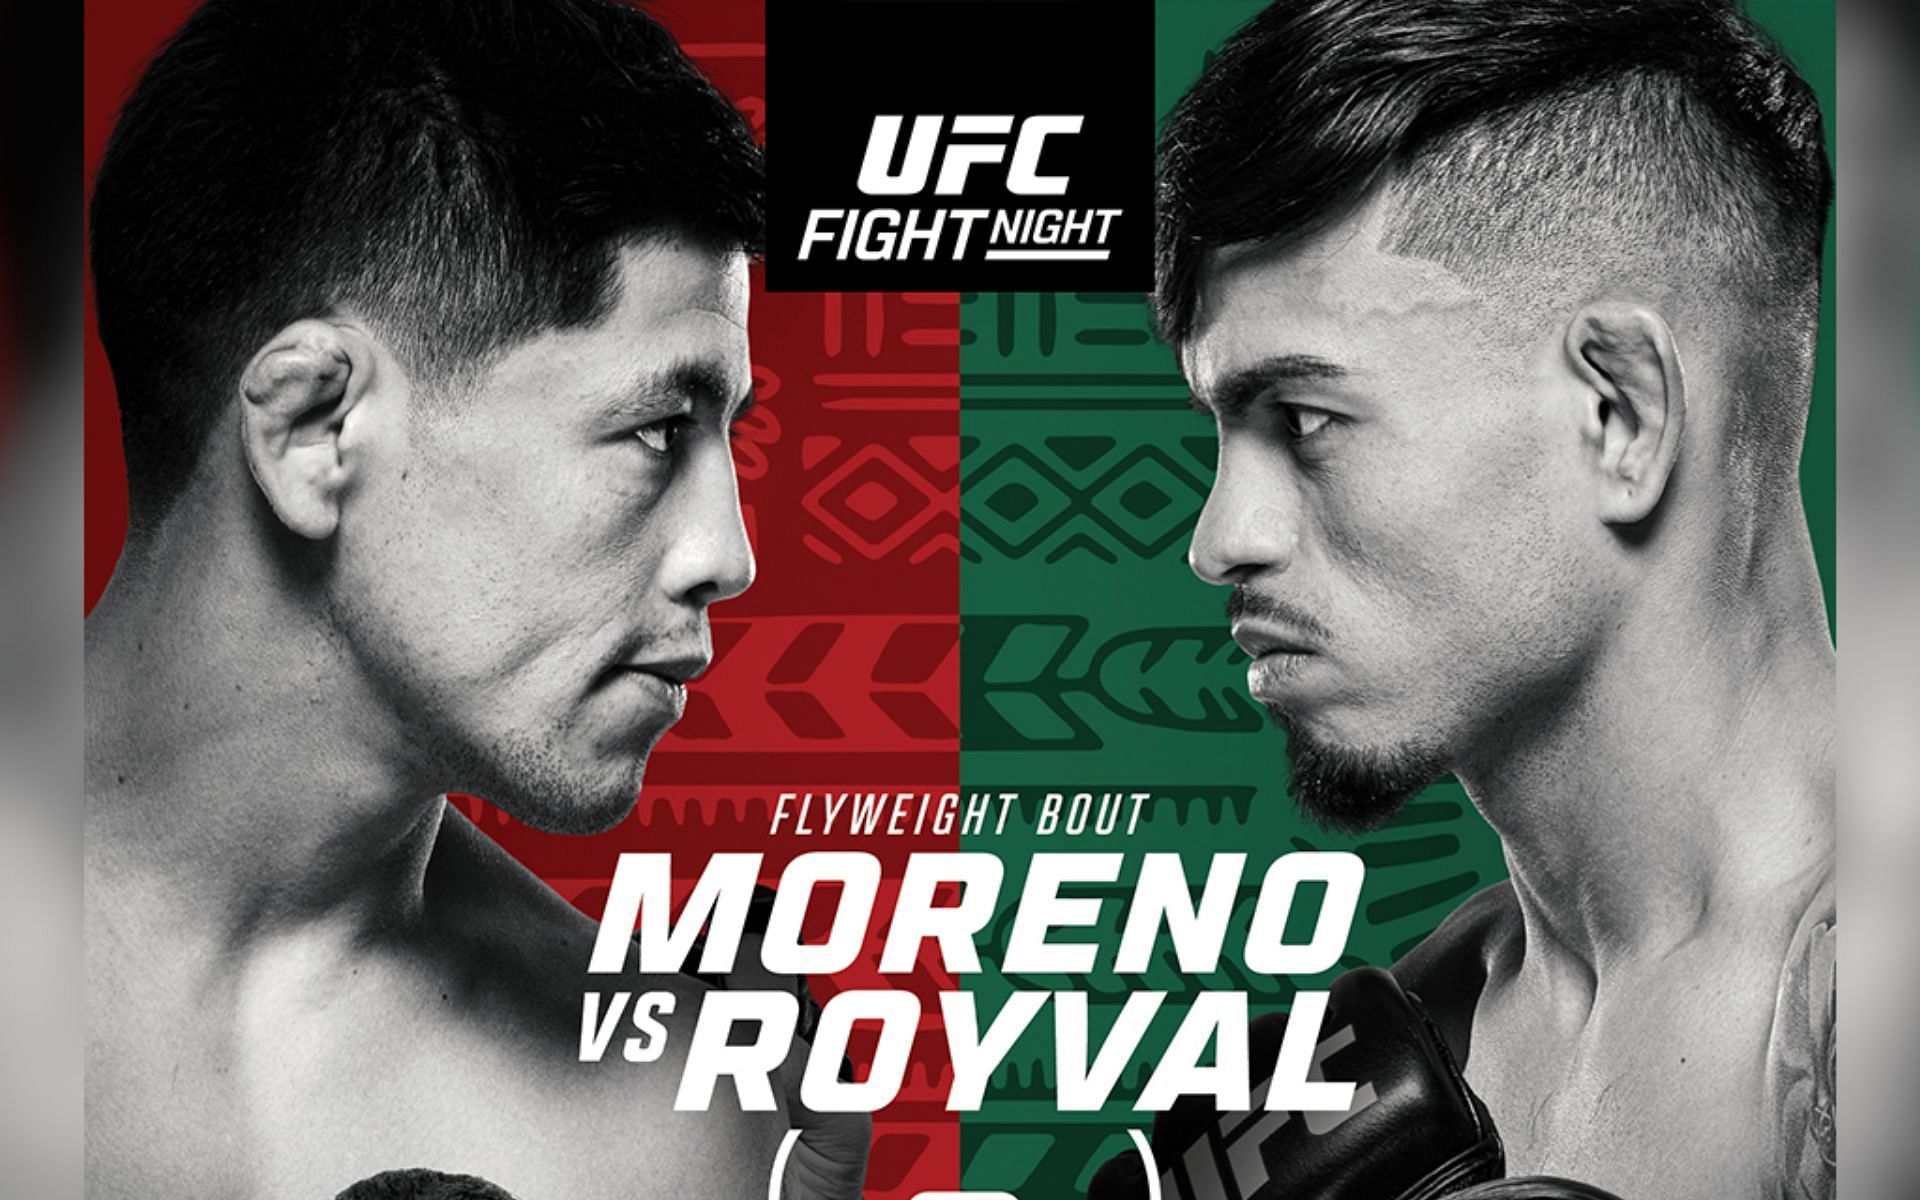 The UFC is back in Mexico this weekend for what should be a fun show